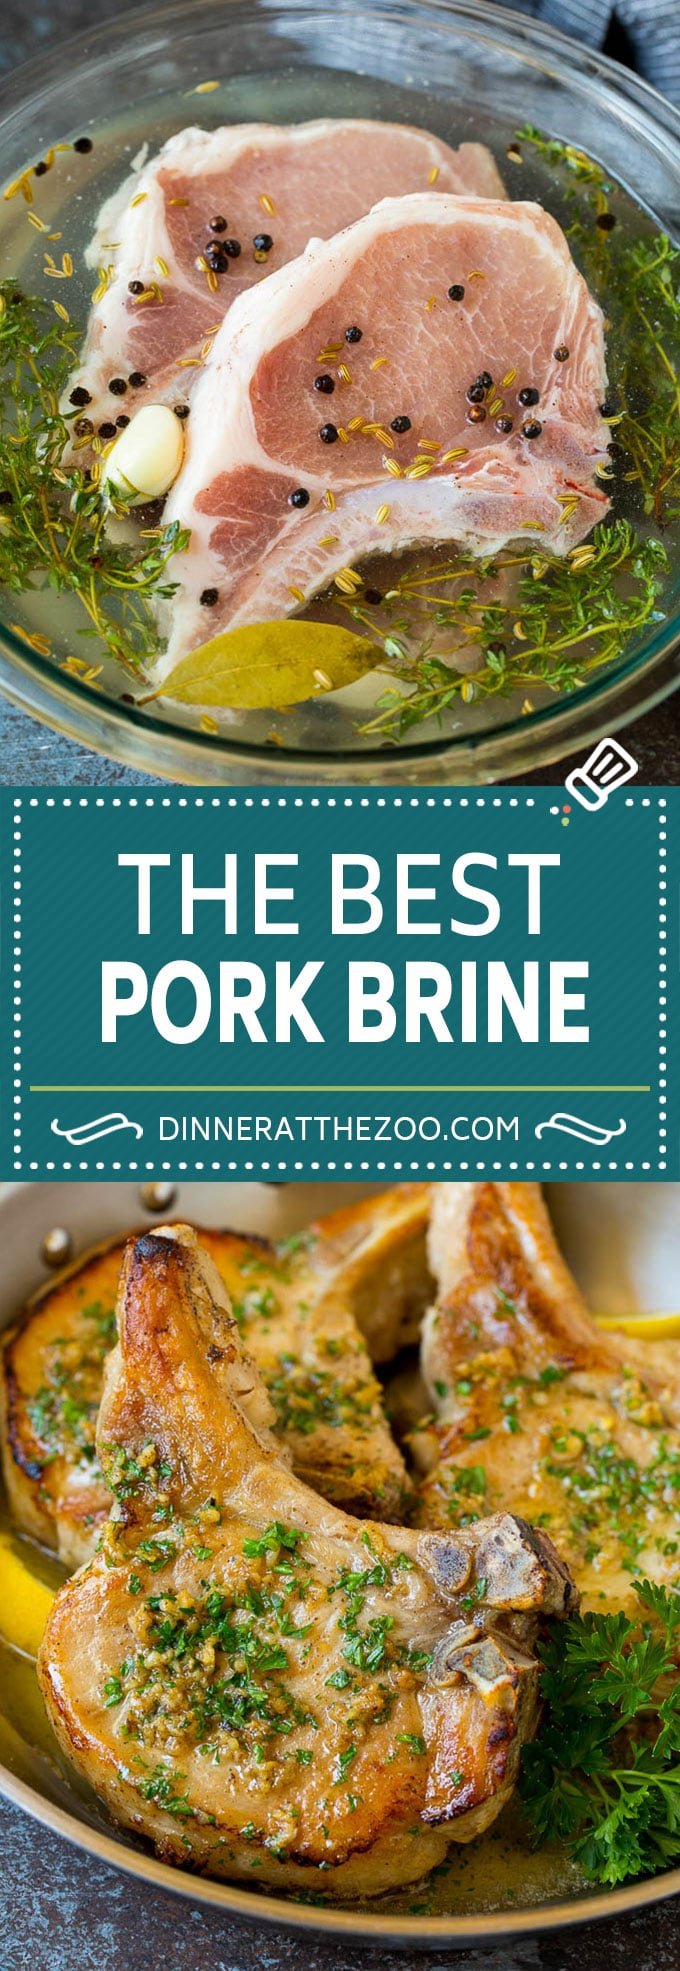 This pork chop brine is a blend of salt, sugar, herbs and spices that infuses the meat with flavor and helps to keep it tender and juicy.